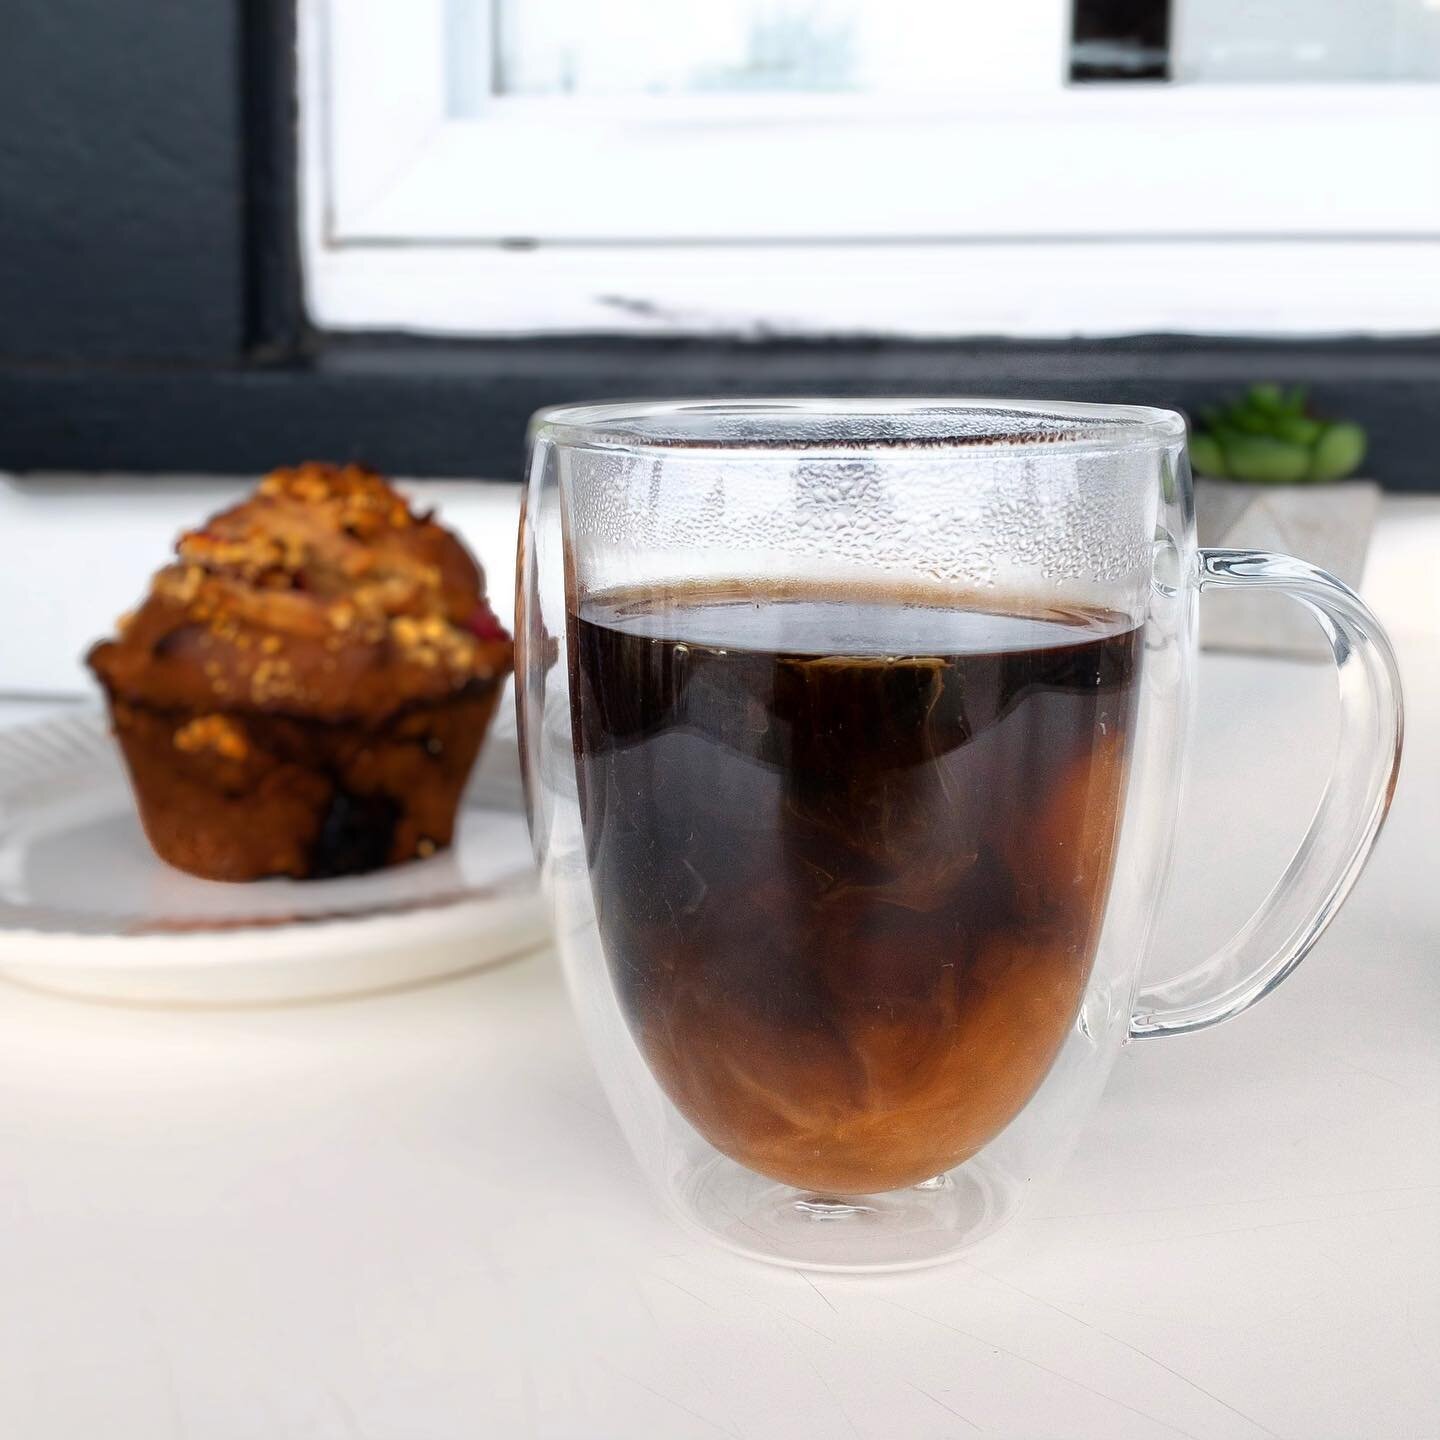 Mondays are made better when it&rsquo;s paired with our locally roasted coffee &amp; natural baked goods 😋 Come try them today!

Open until 3PM 

#cafe #locallyroasted #bakedgoods #muffinandcoffee #station33cafeandyoga #hamptonnb #discovernb